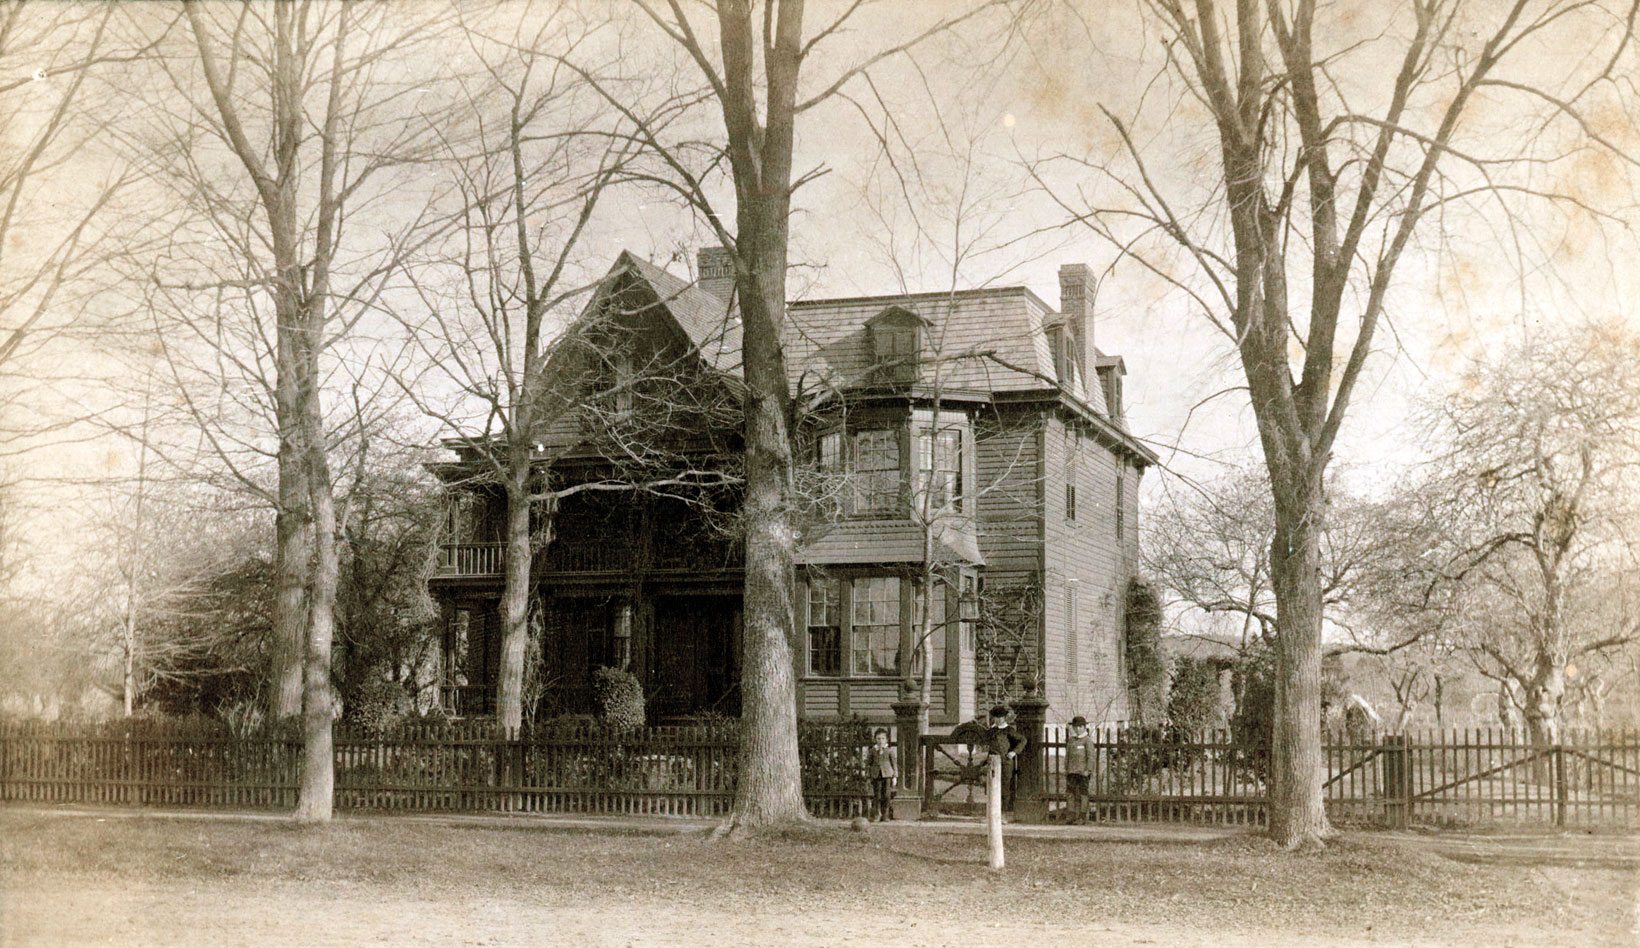 Landmarks: The Disappearance of a Lyme Street House